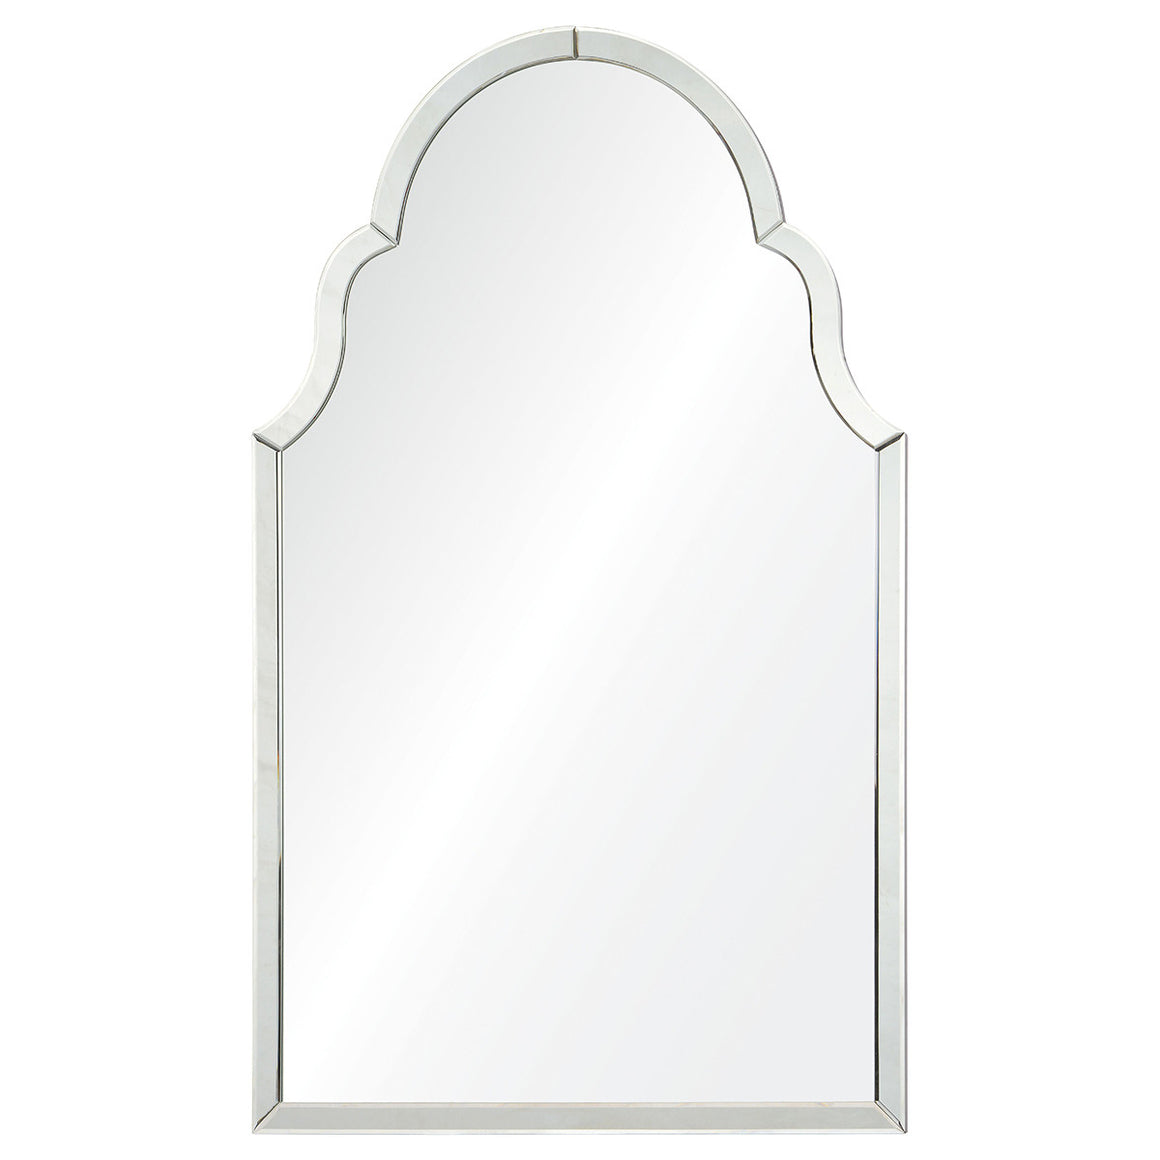 Cathedral Arched Mirror